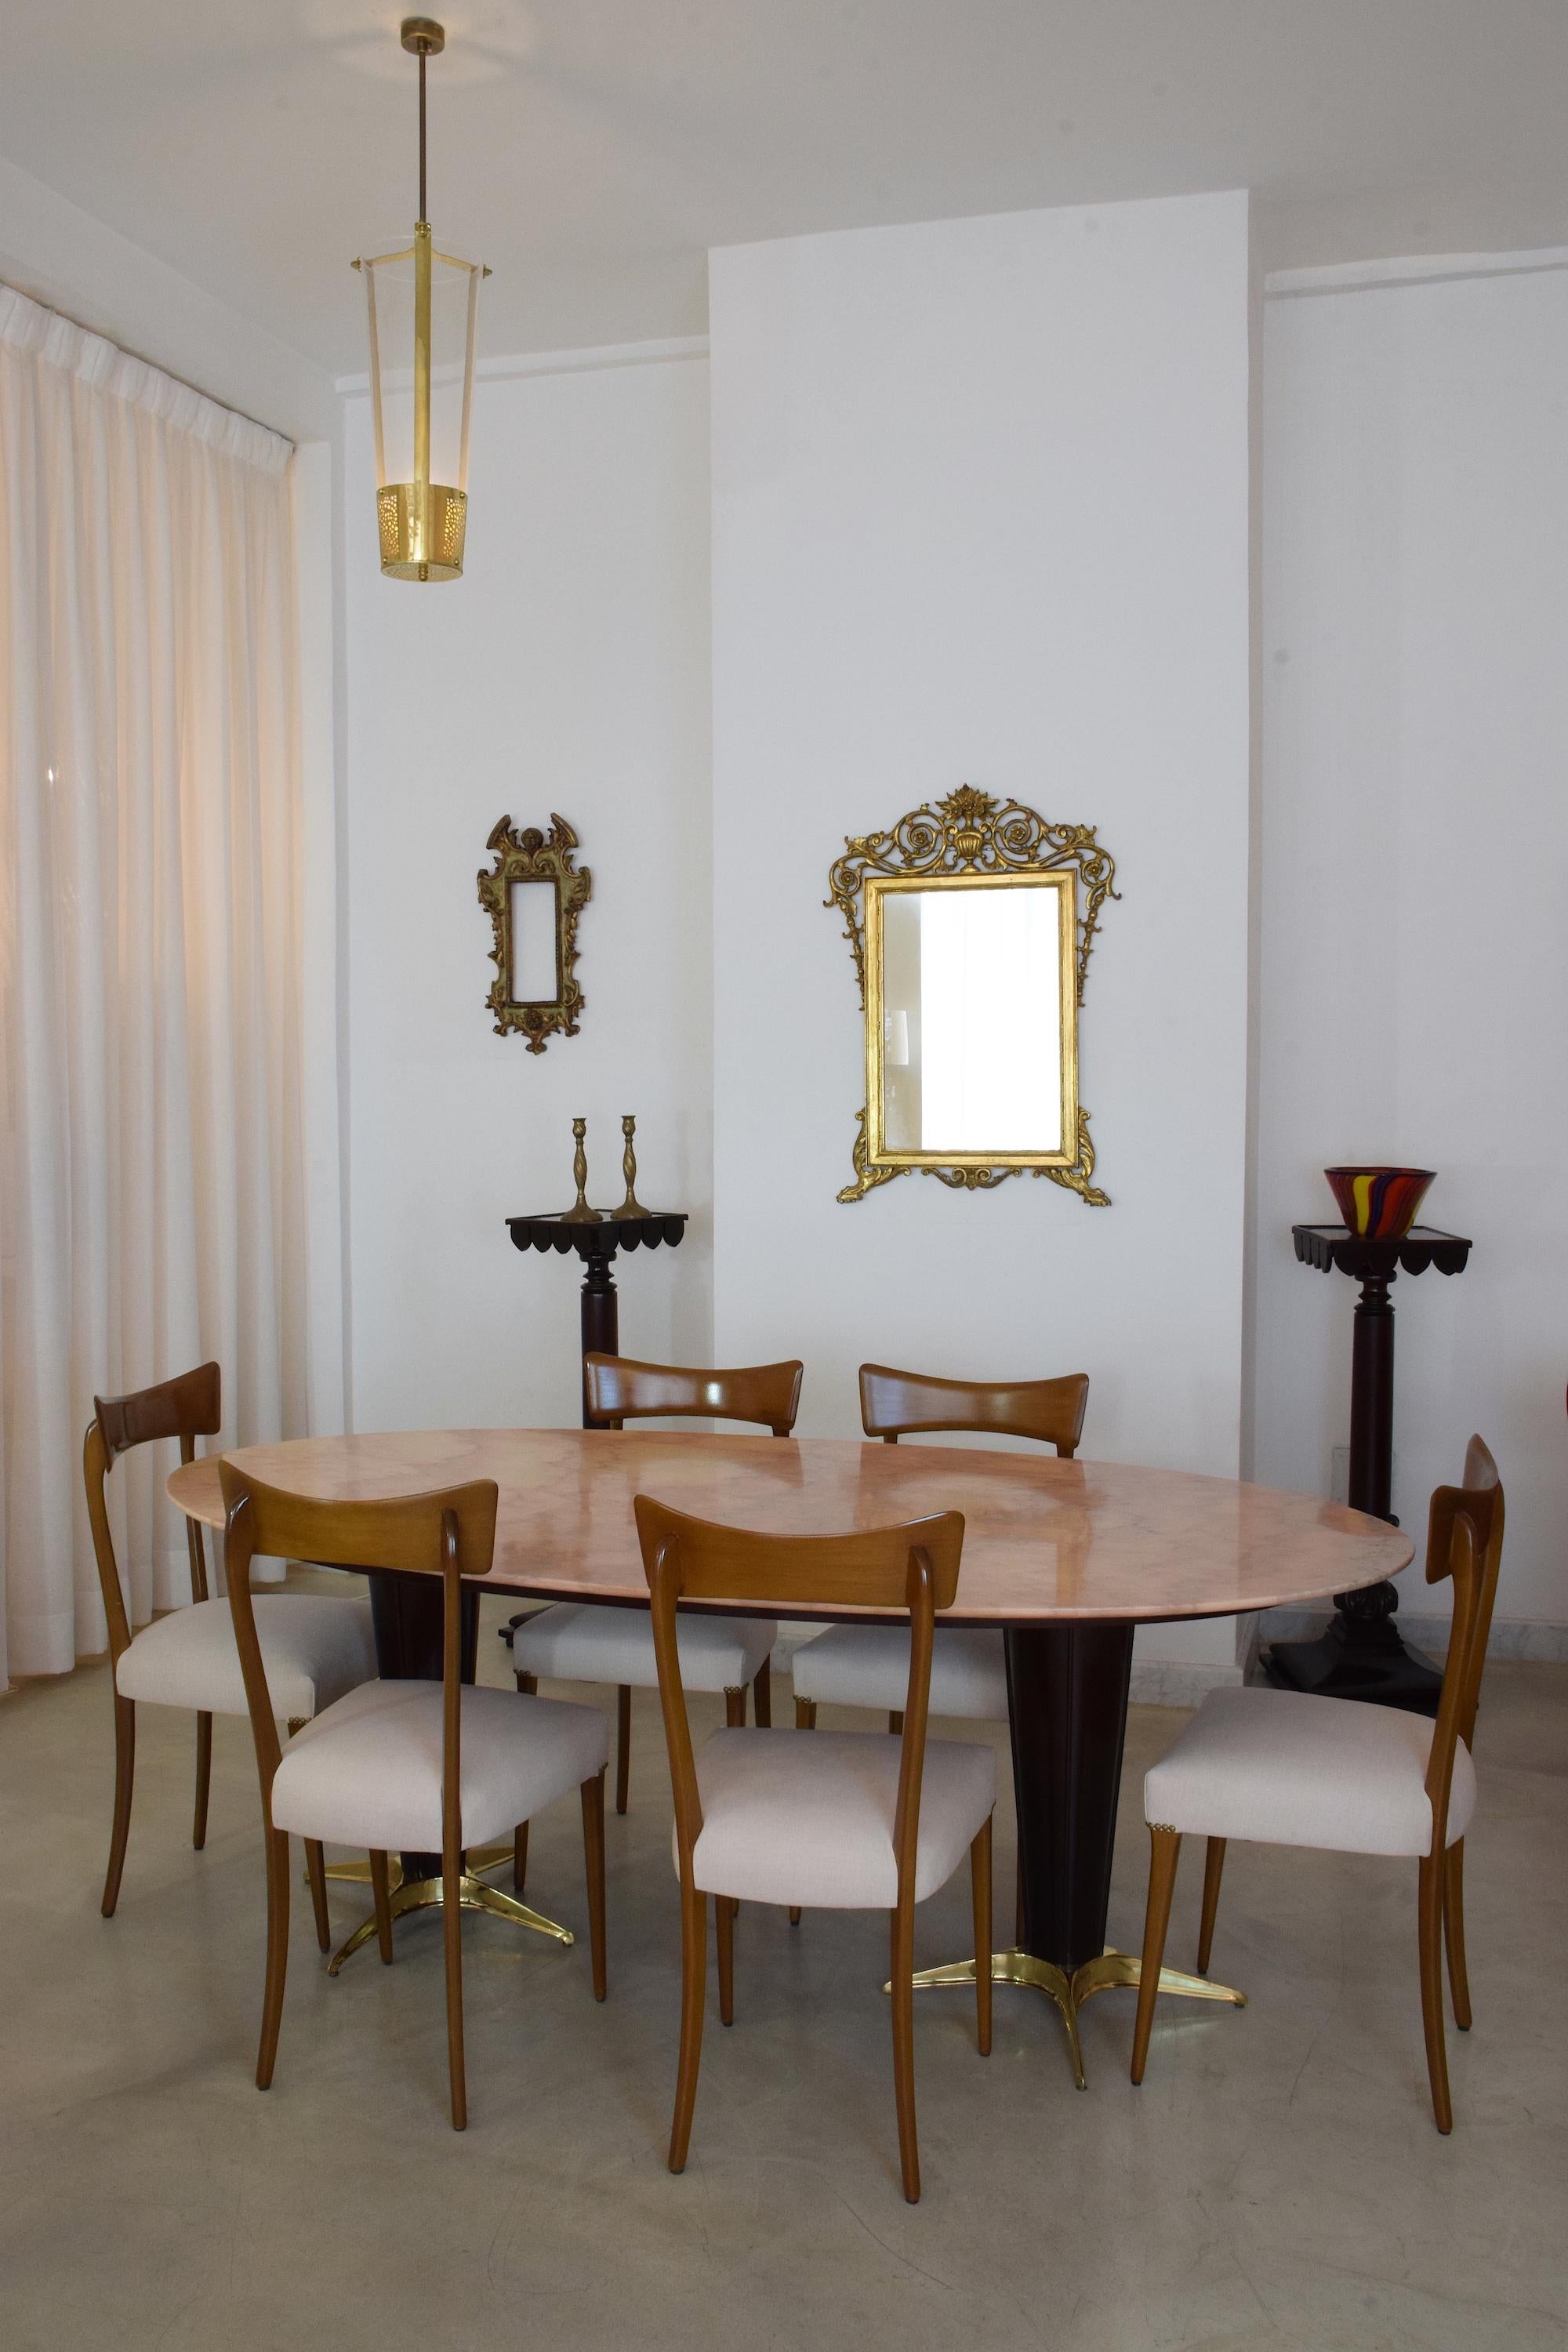 A 20th century vintage big 8 seater vintage oval dining table composed of a Rosa Portuges pink marble tabletop and a mahogany veneer structure with sculptural star-shaped solid brass endings.
In restored condition with new finishing, polishing, and